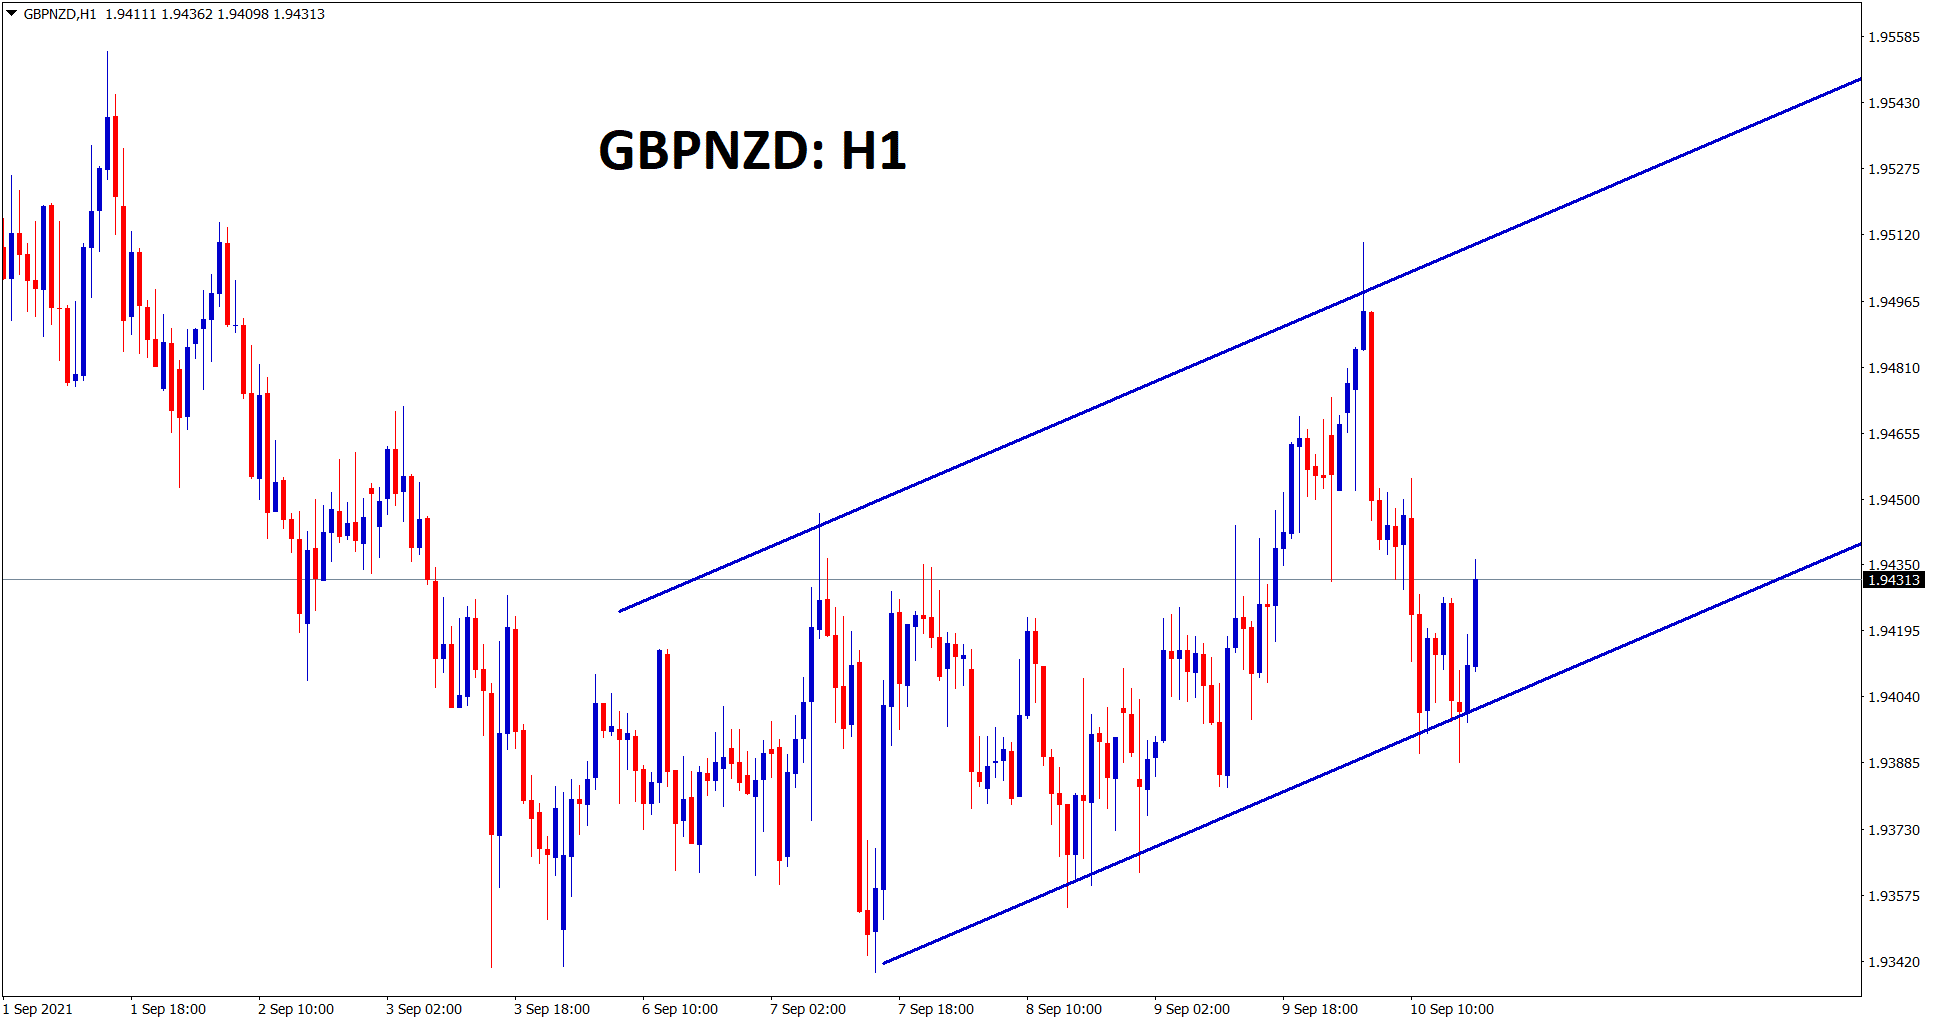 GBPNZD is moving in an ascending channel range